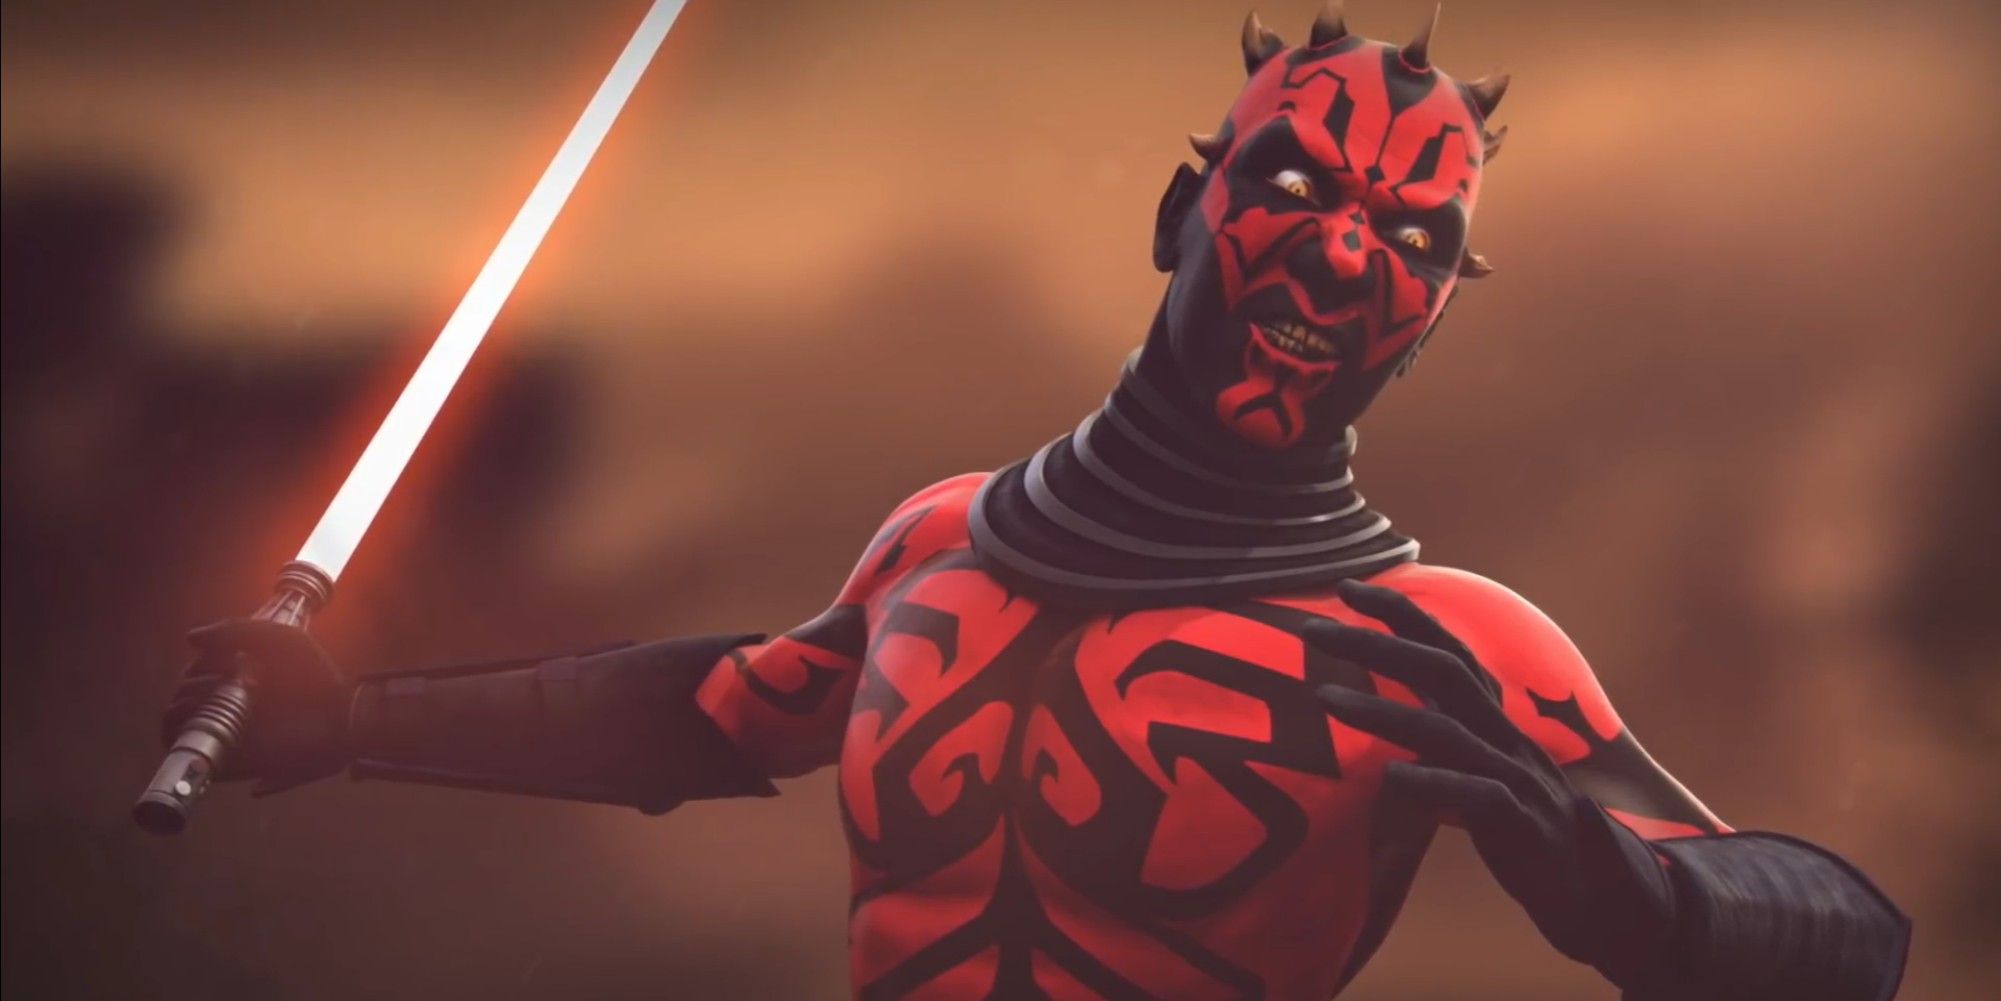 Darth Maul wielding his lightsaber in The Clone Wars